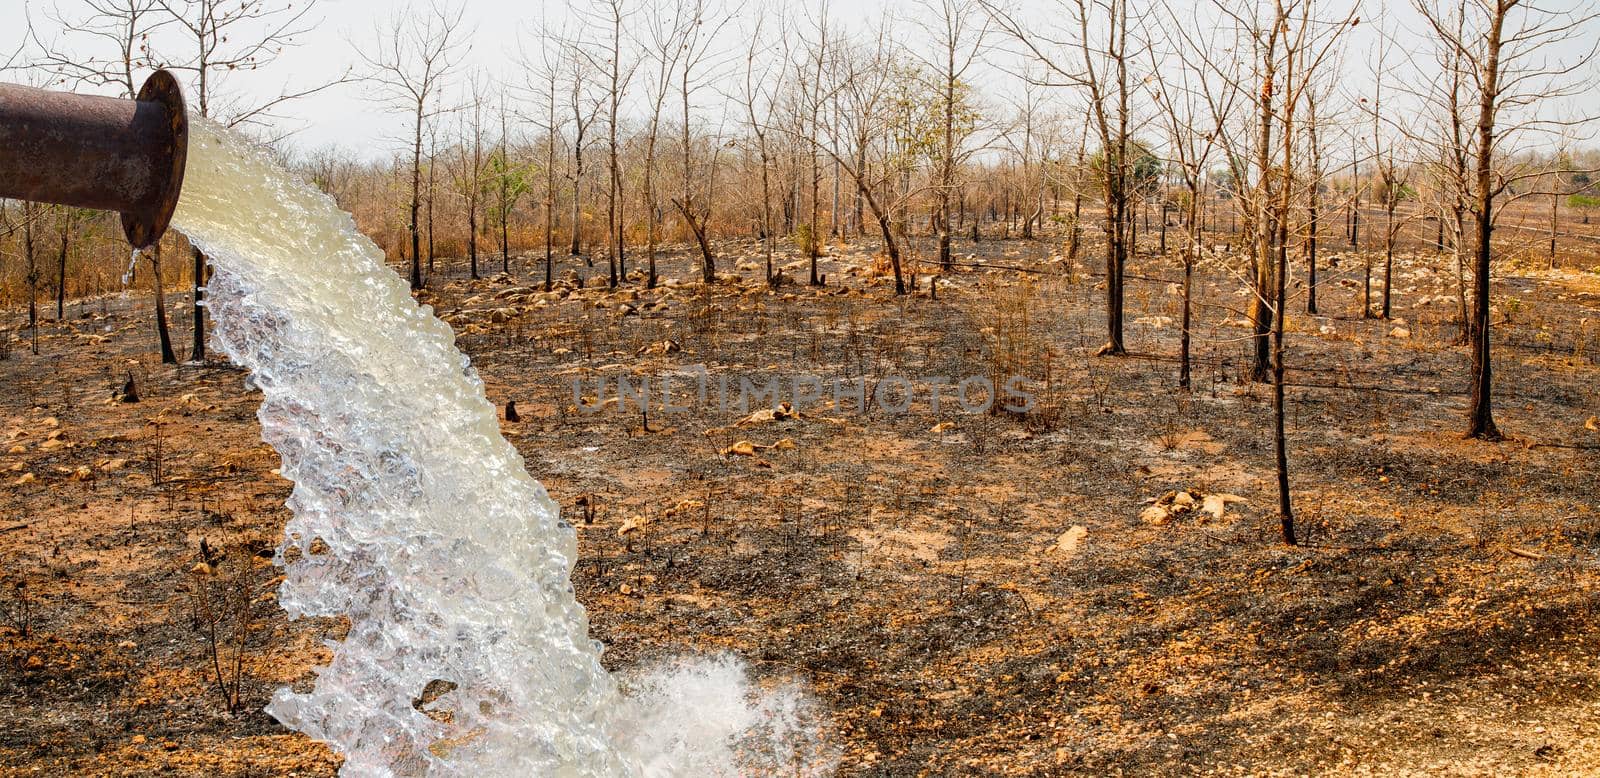 Water fill in arid area by the destruction of forests for shifting cultivation in Thailand. by toa55